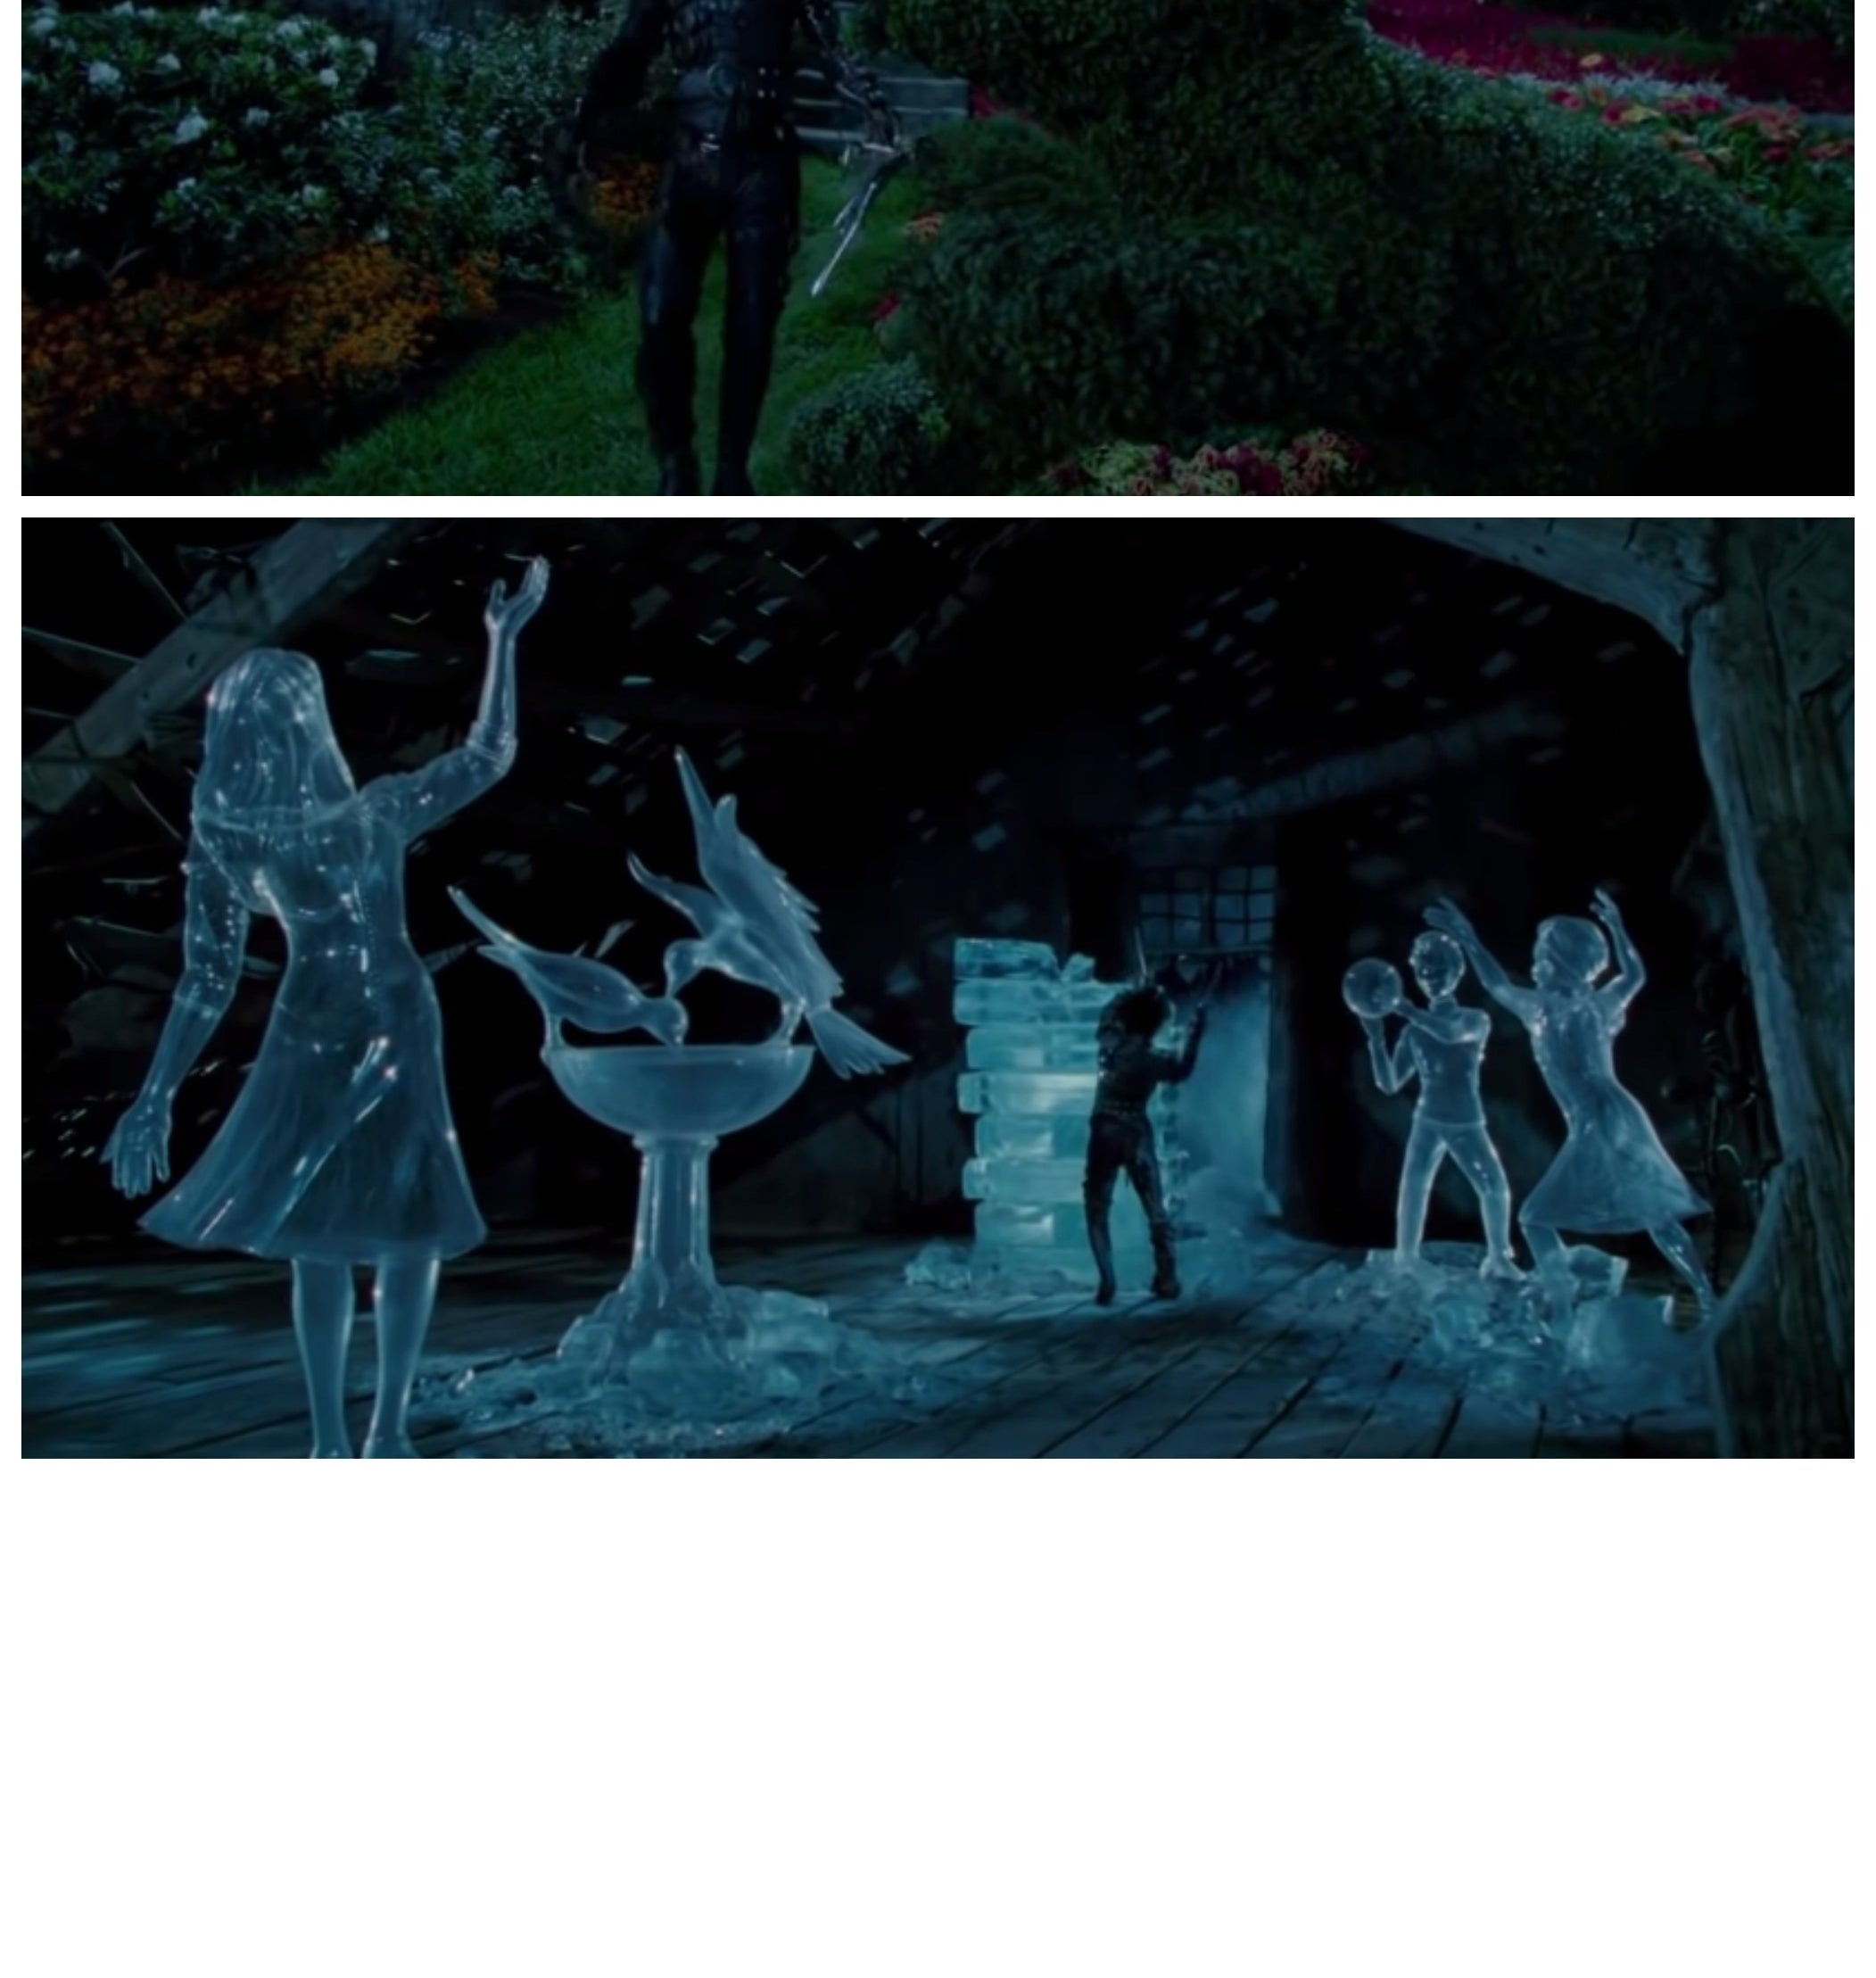 A collage showing Edward Scissorhands trimming hedges and carving ice sculptures in his tower